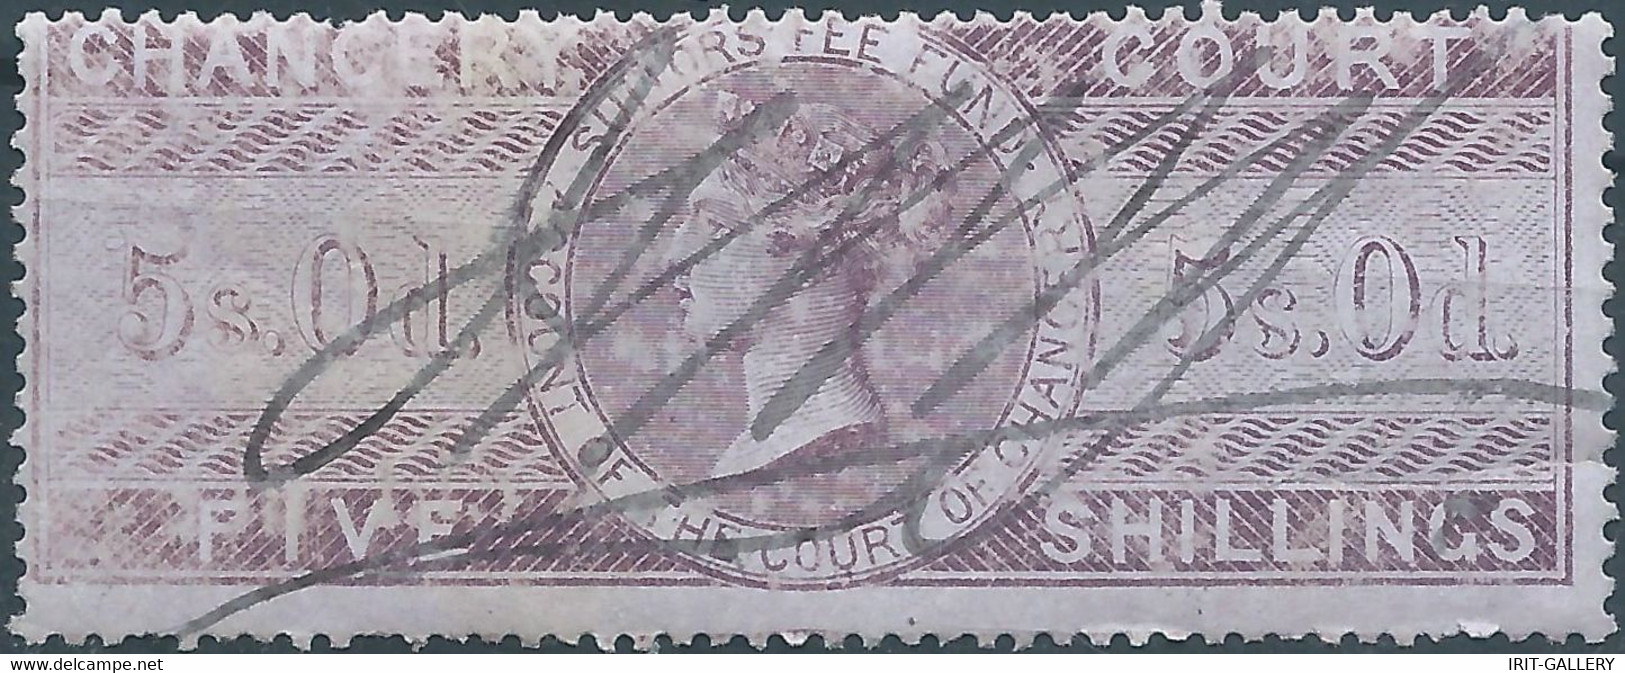 Great Britain-ENGLAND,Queen Victoria,1855 /1870 Revenue Stamp Tax Fiscal CHANCERY COURT,5s.0d. FIVE Shillings,Used - Fiscaux